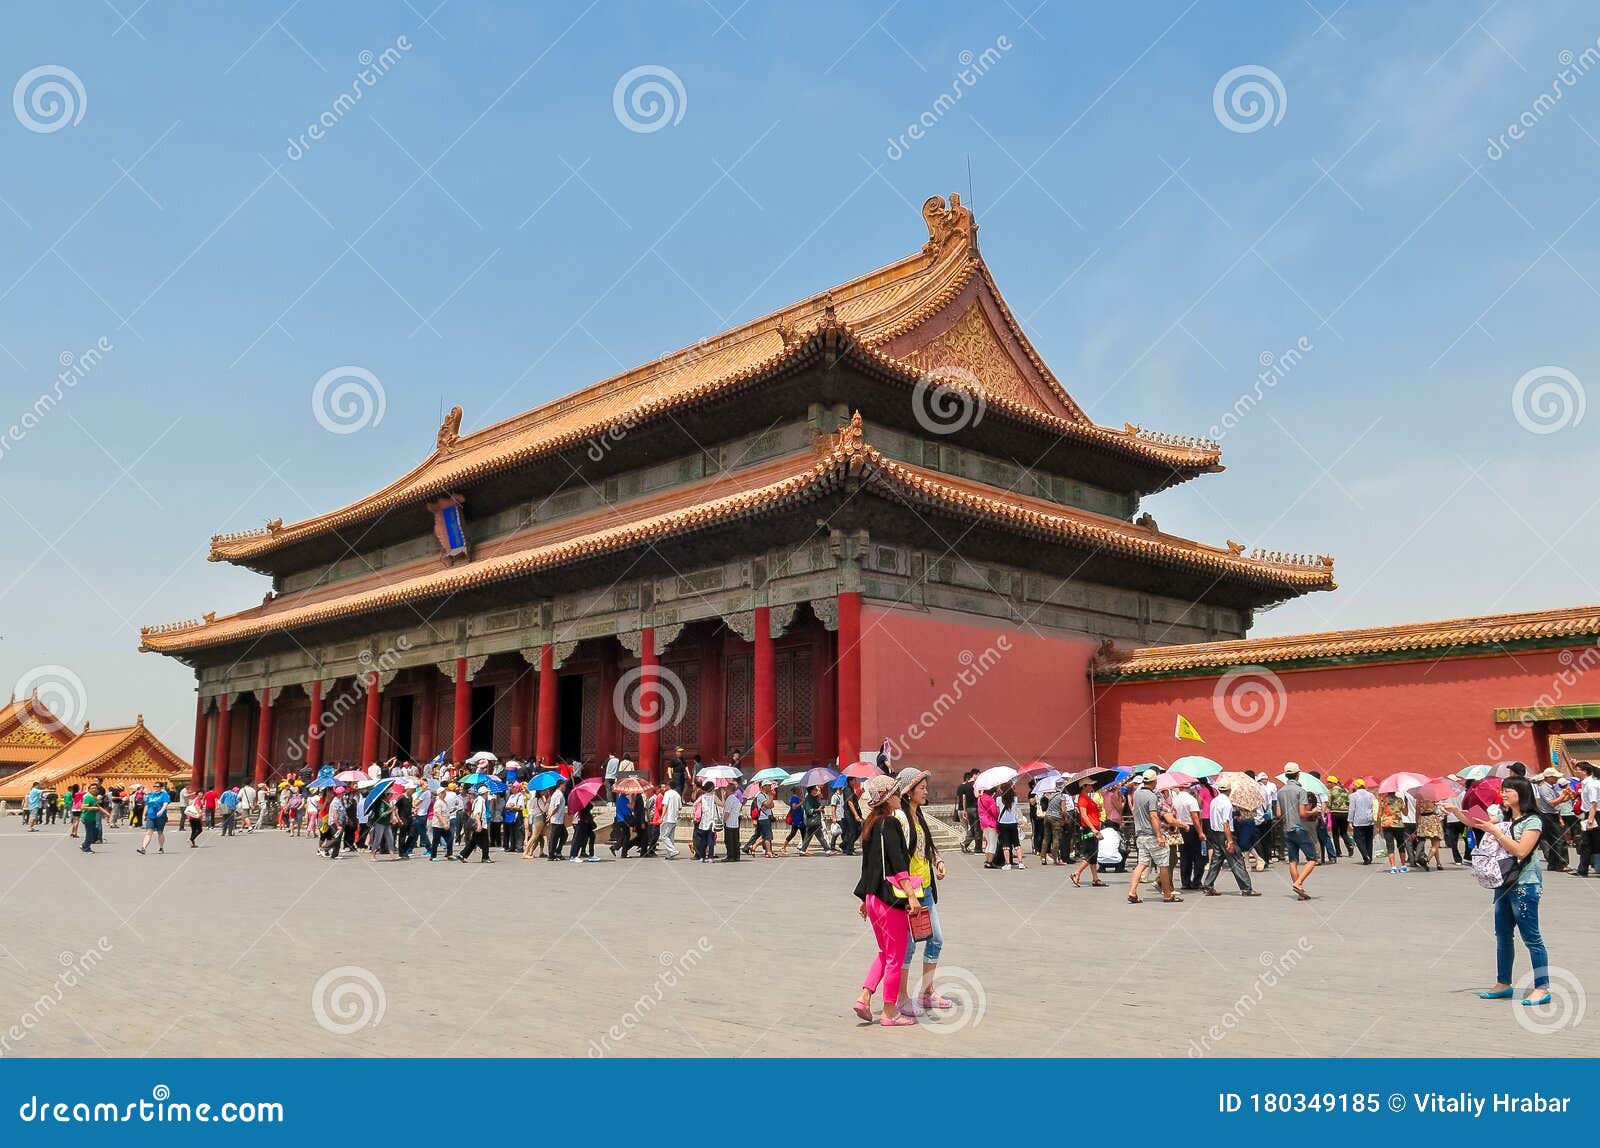 FORBIDDEN CITY: Home of CHINESE EMPERORS